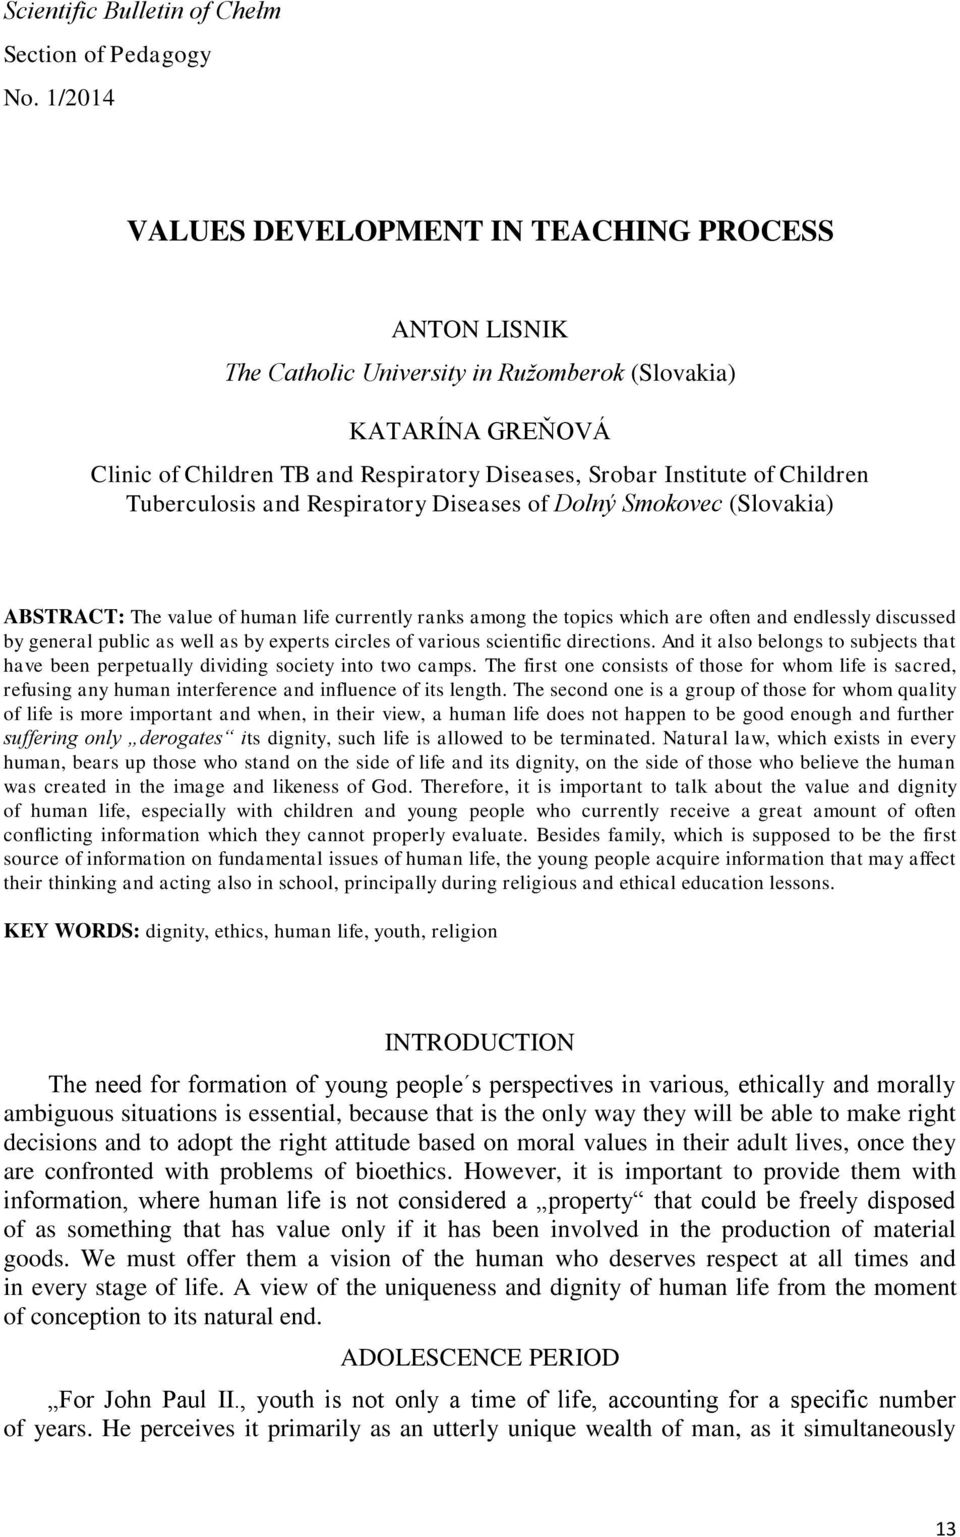 Children Tuberculosis and Respiratory Diseases of Dolný Smokovec (Slovakia) ABSTRACT: The value of human life currently ranks among the topics which are often and endlessly discussed by general